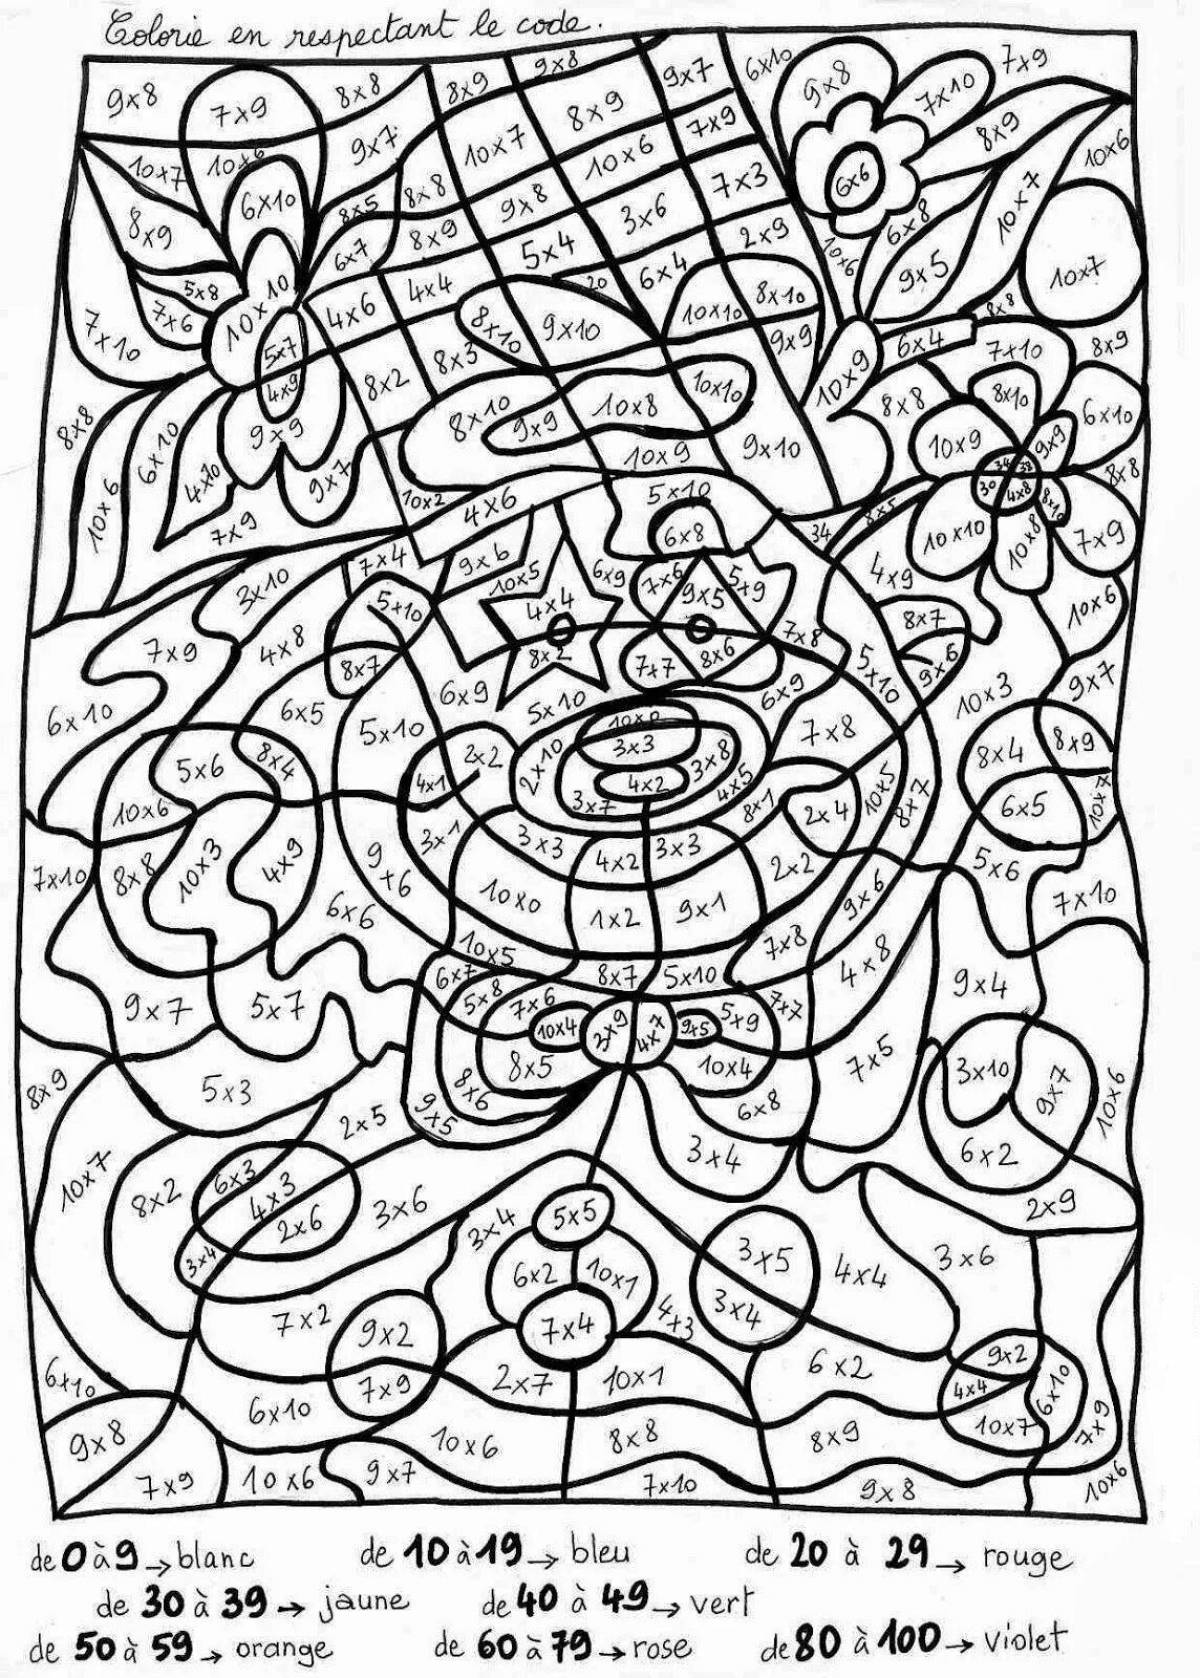 Color-frenzy coloring page by numbers math